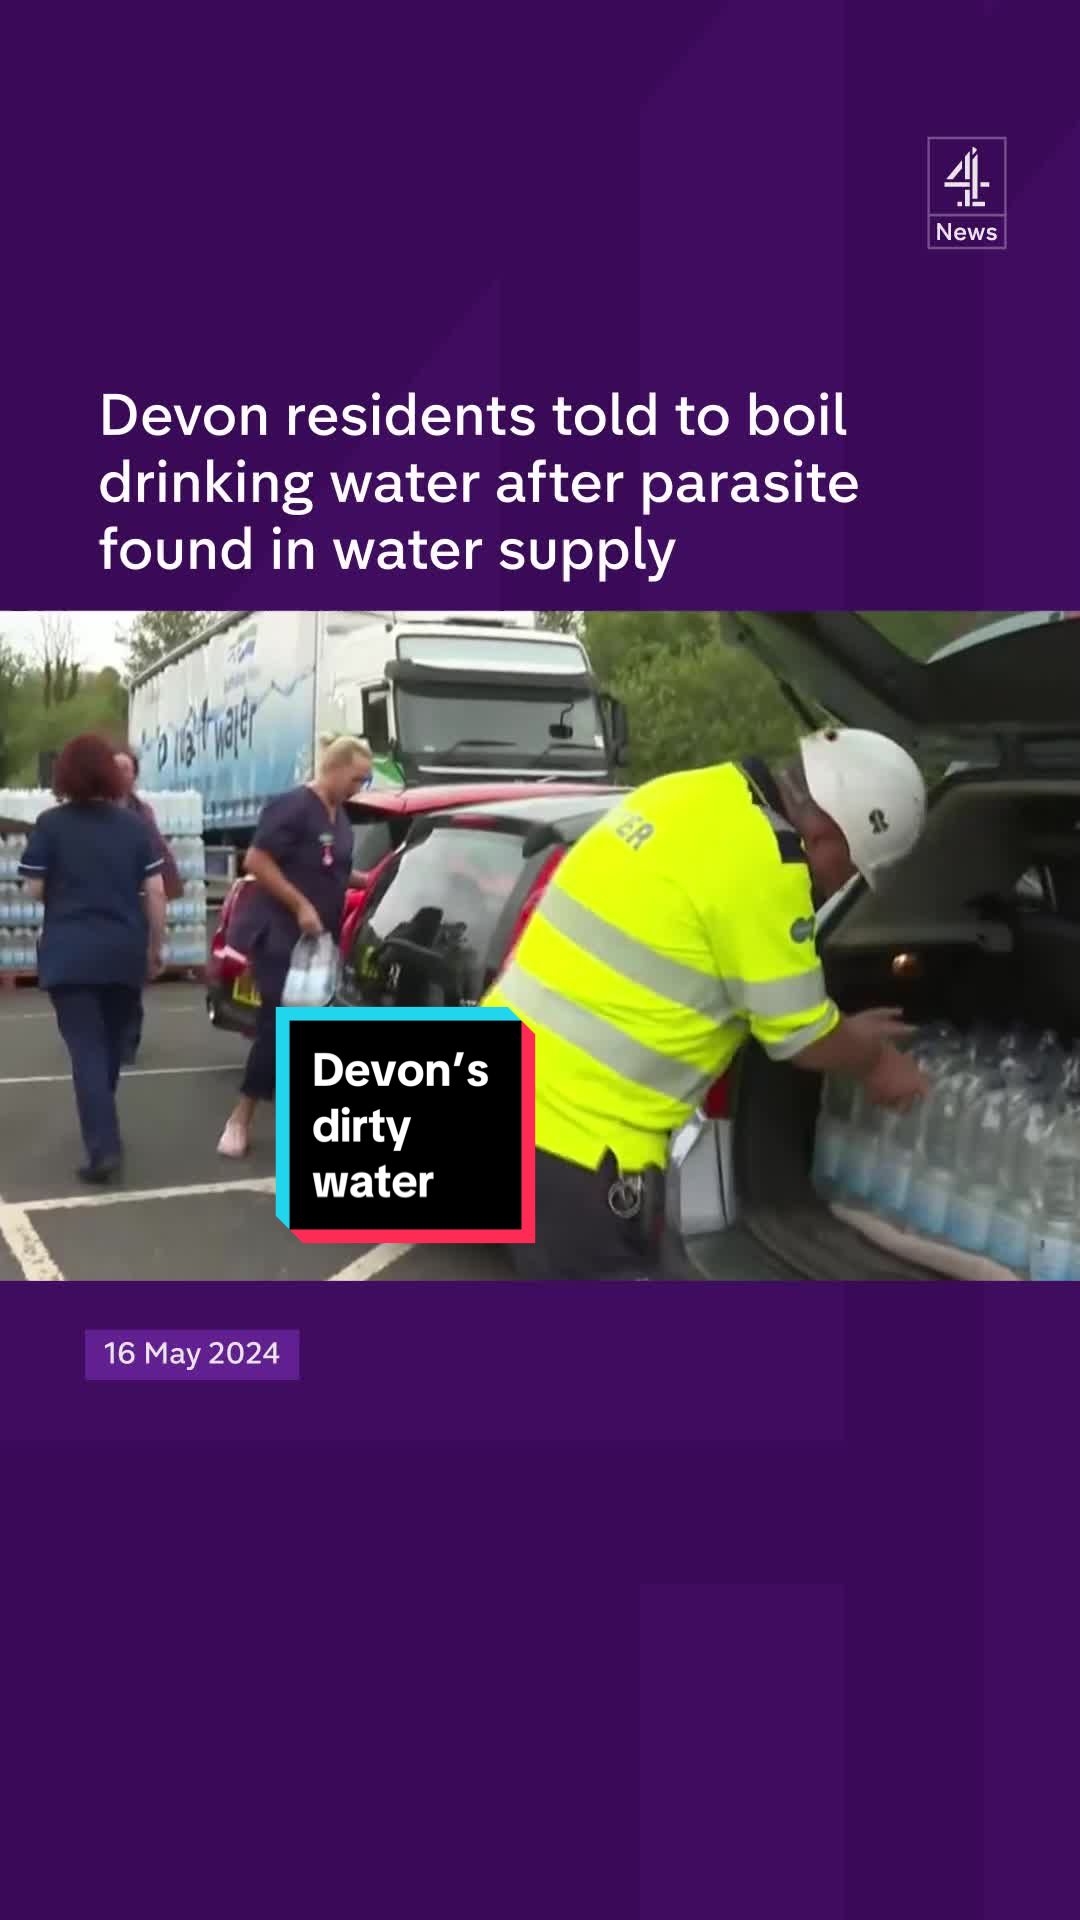 People in part of Devon have been told to boil tap water or drink bottled water until further notice after aparasite was found in supplies to homes. Bottled water stations have been set up and a primary school in Brixham has been forced to close. It is thought hundreds of residents are experiencing symptoms including diarrhoea, stomach pains and nausea. #DevonWater #Devon #WaterPollution #SouthWestWater #HealthSecurityAgency #UKHSA #C4news